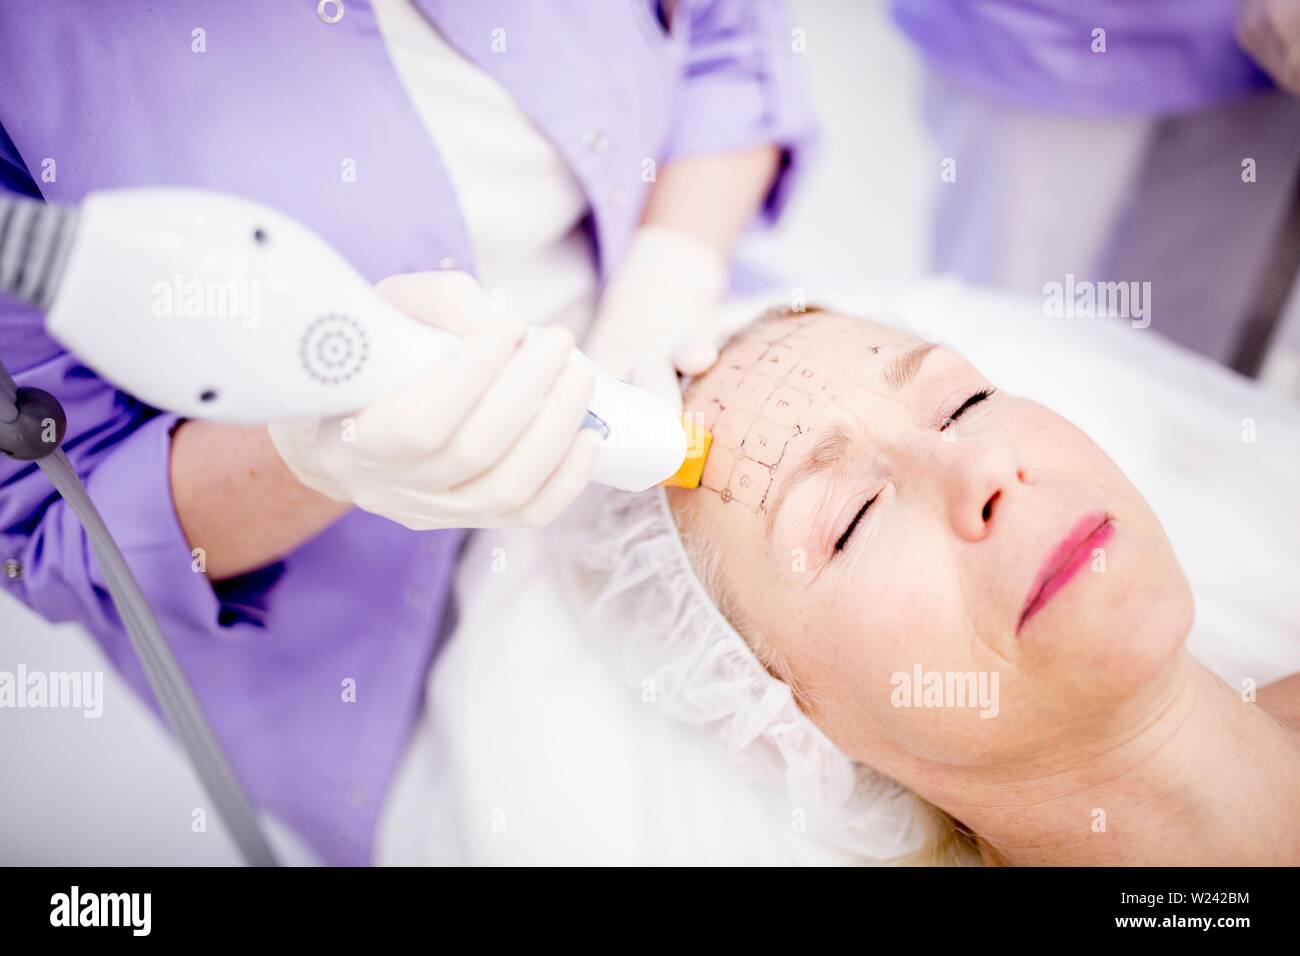 Dermatologist giving thermage treatment to mature woman's forehead to soften wrinkles. Stock Photo